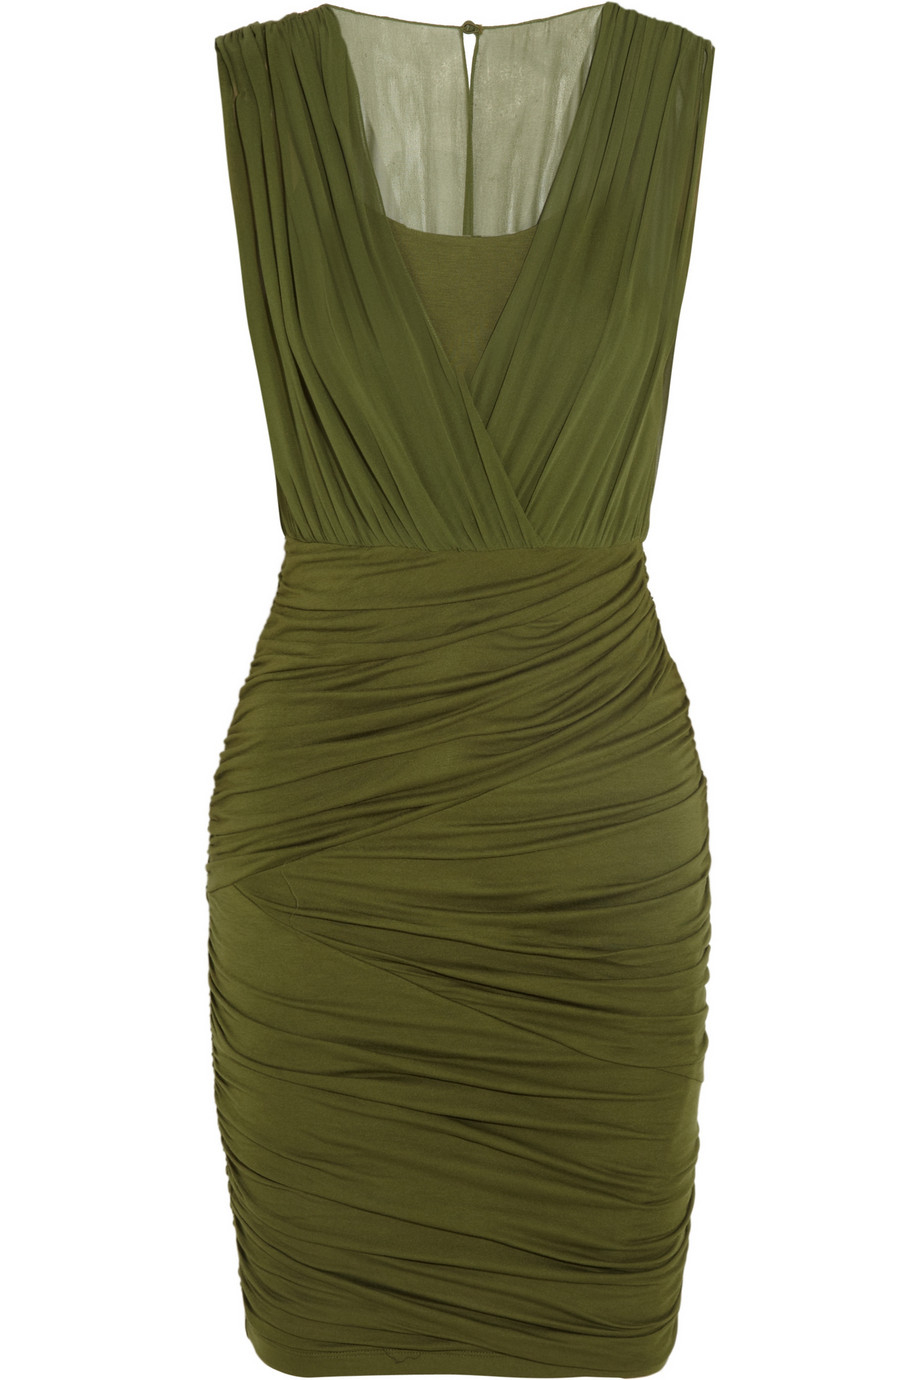 Lyst - Alice + Olivia Jersey and Draped Crepe Mini Dress in Green